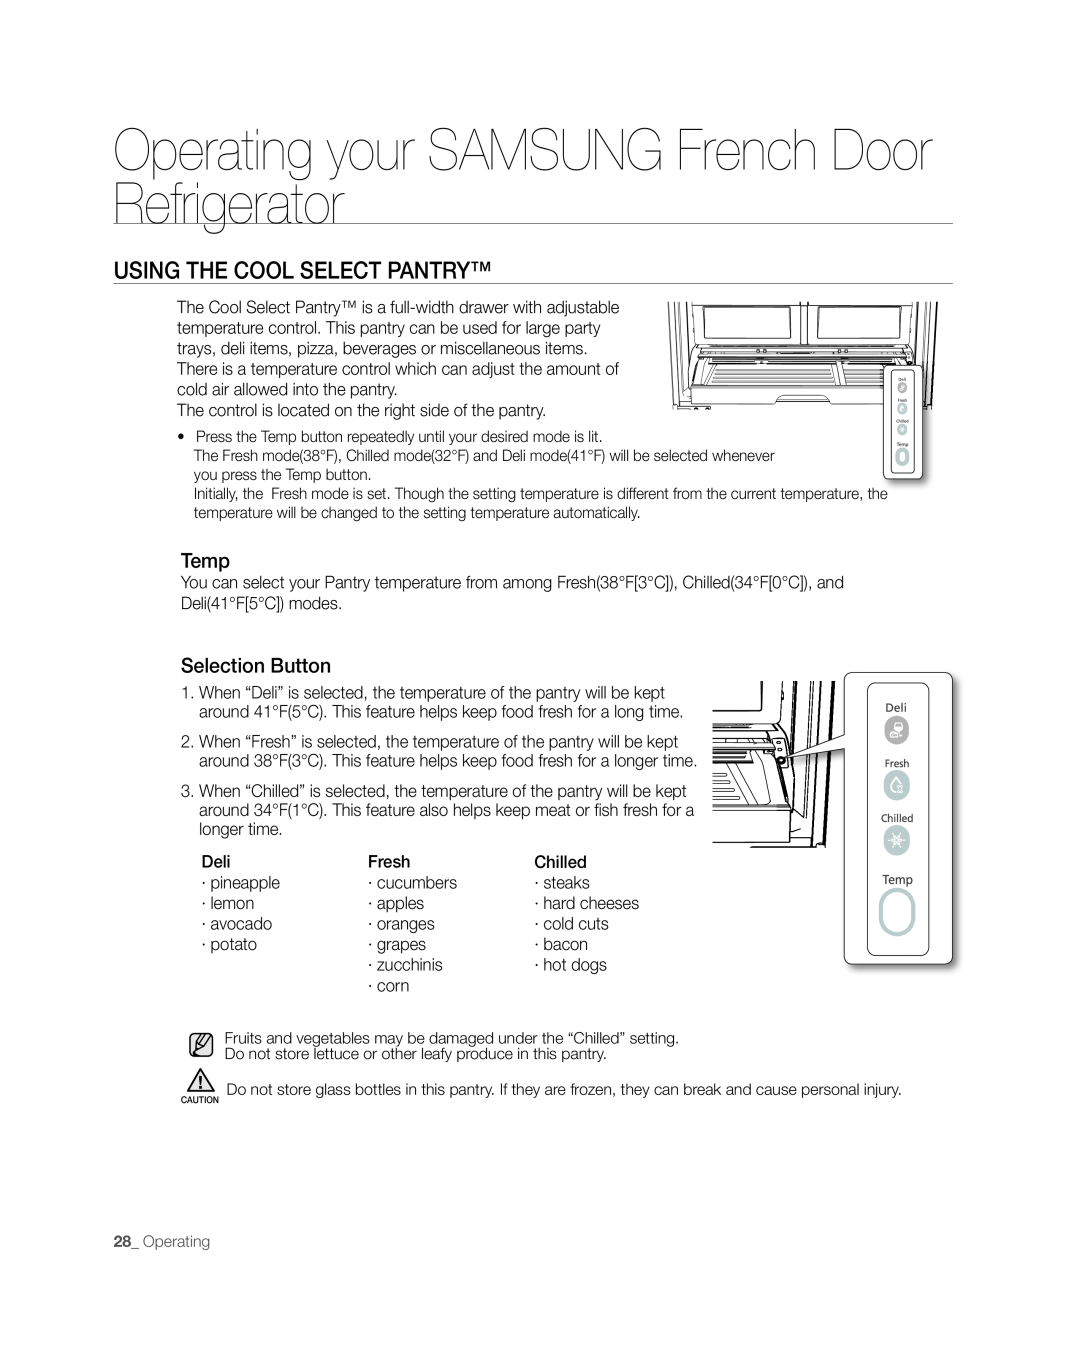 Samsung RFG297AAWP usinG tHE Cool sElECt PAntRy, Operating your SAMSUNG French Door Refrigerator, temp, selection Button 